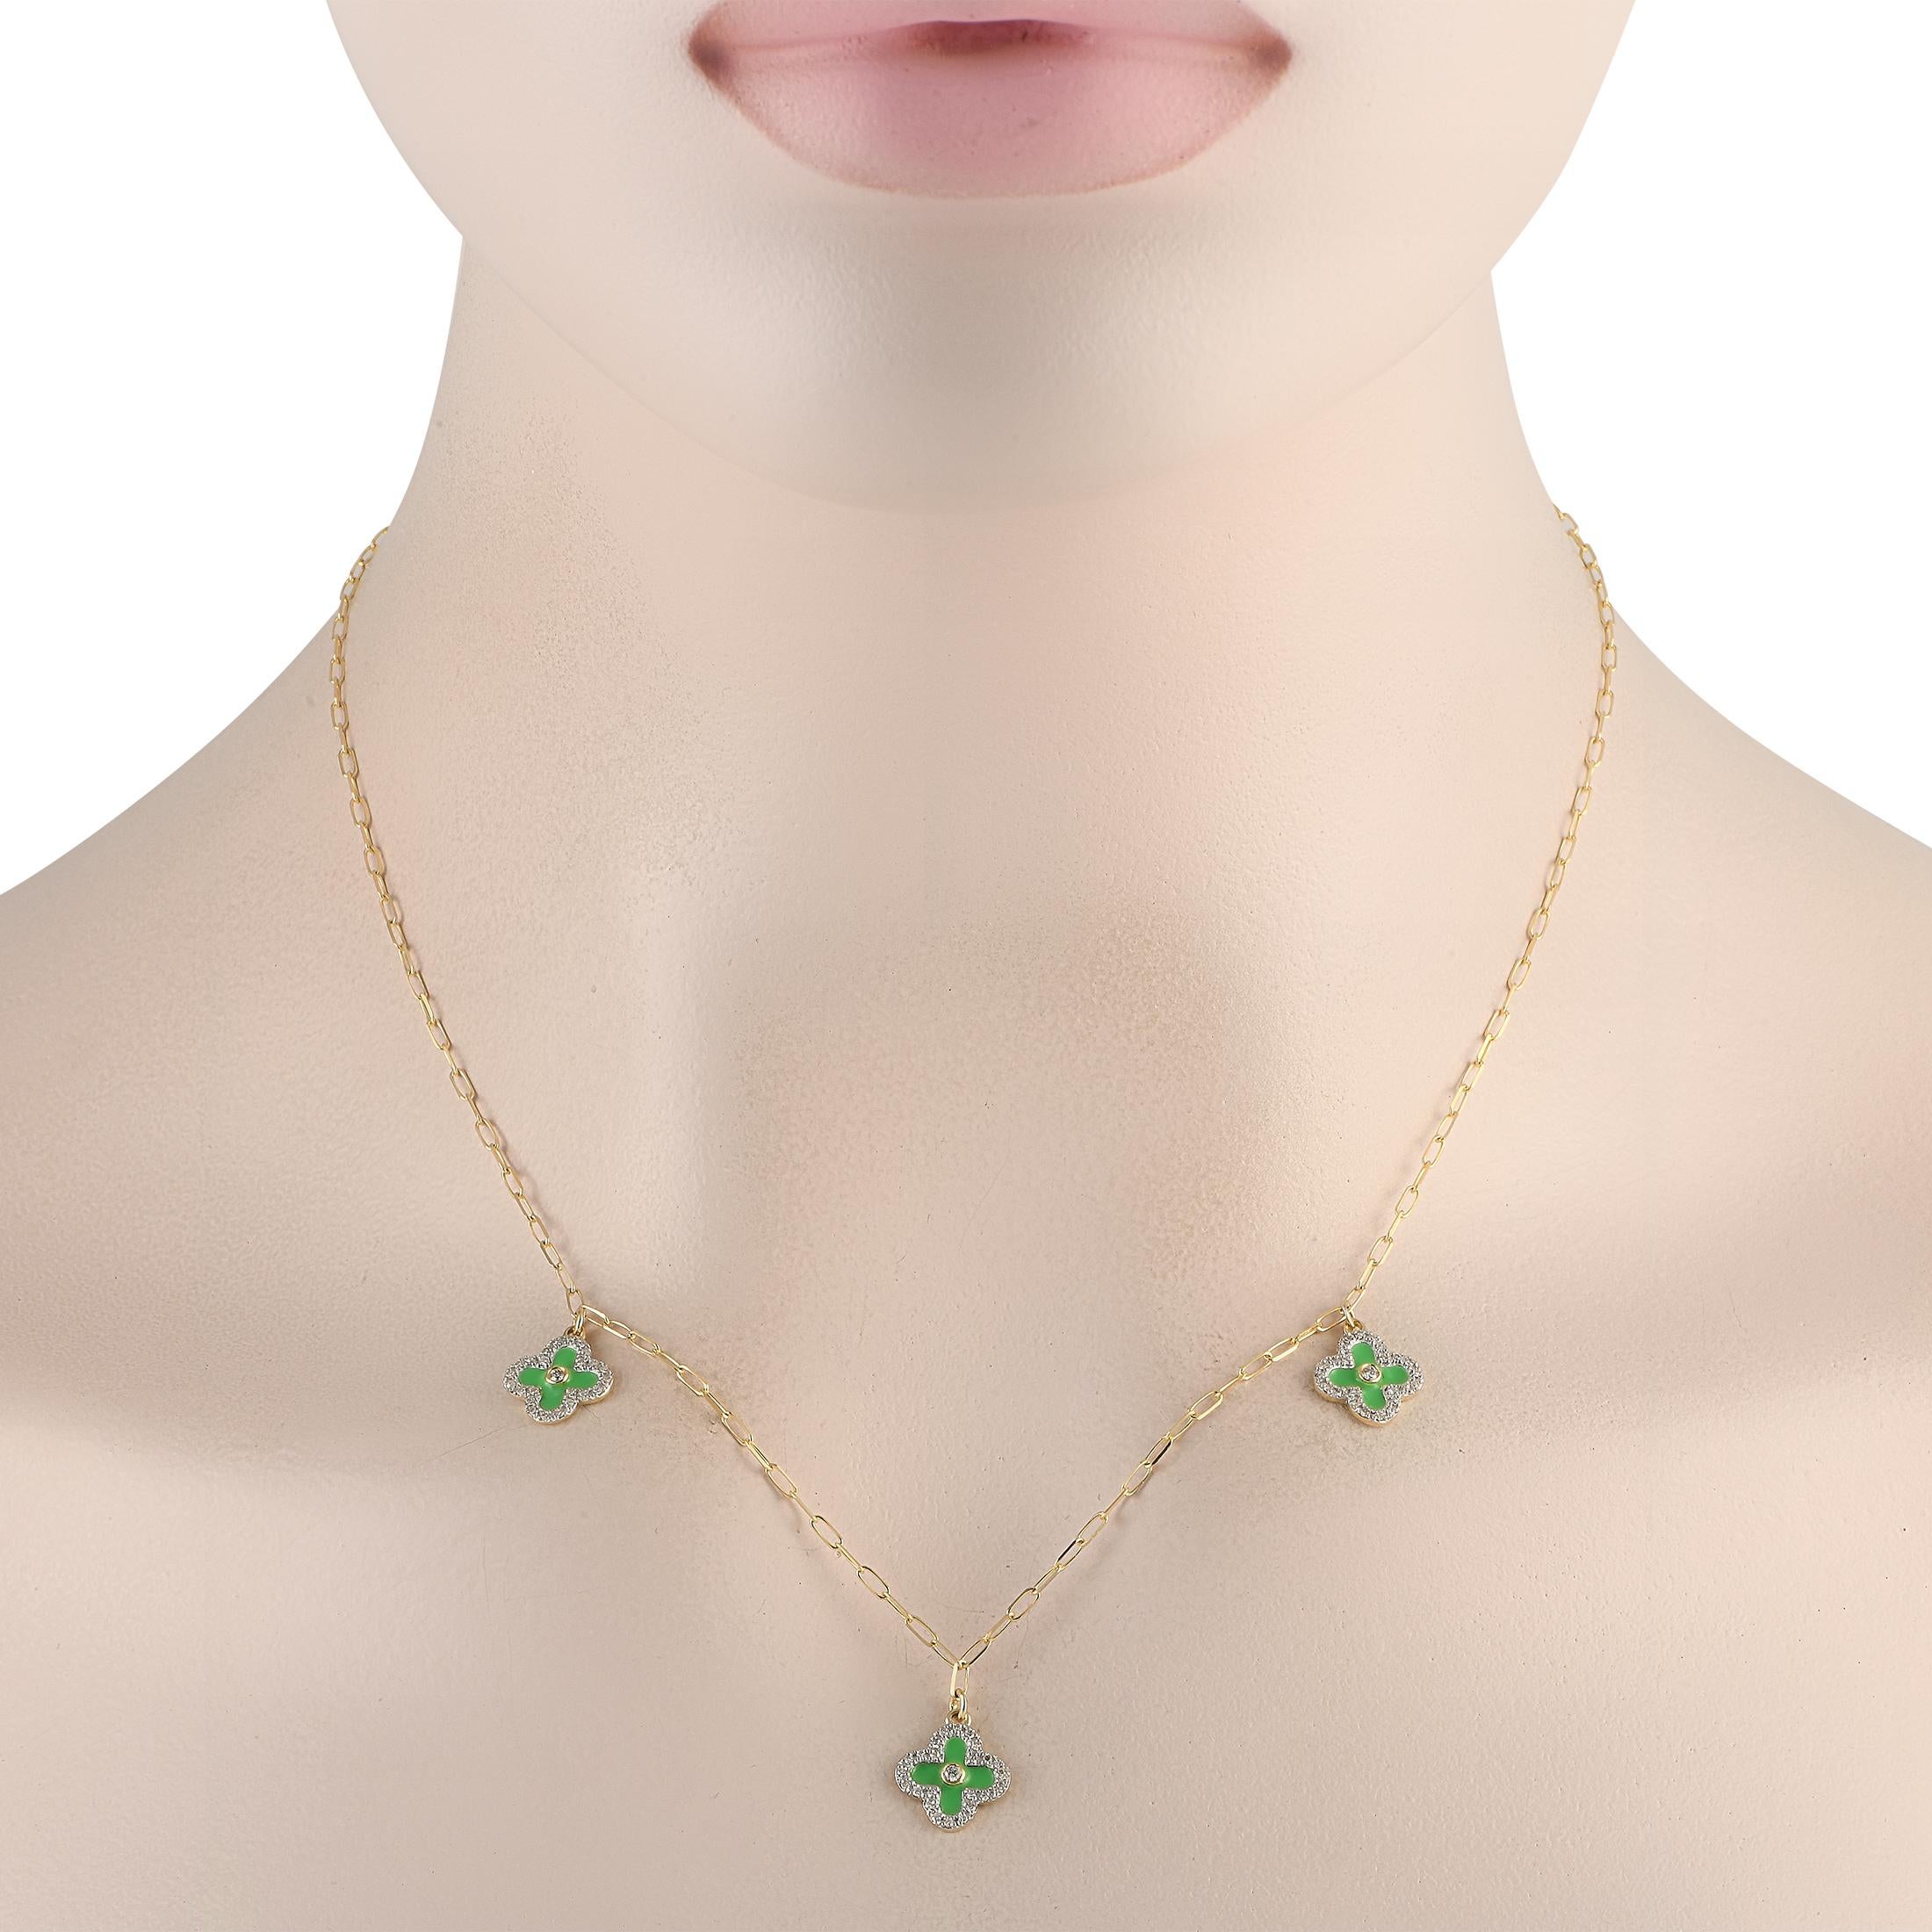 Add an exciting pop of color to any ensemble with this elegant necklace. Suspended from the lustrous 18 paperclip chain are a trio of green clover-shaped pendants measuring 0.45 round. Crafted from 14K Yellow Gold, diamonds with a total weight of